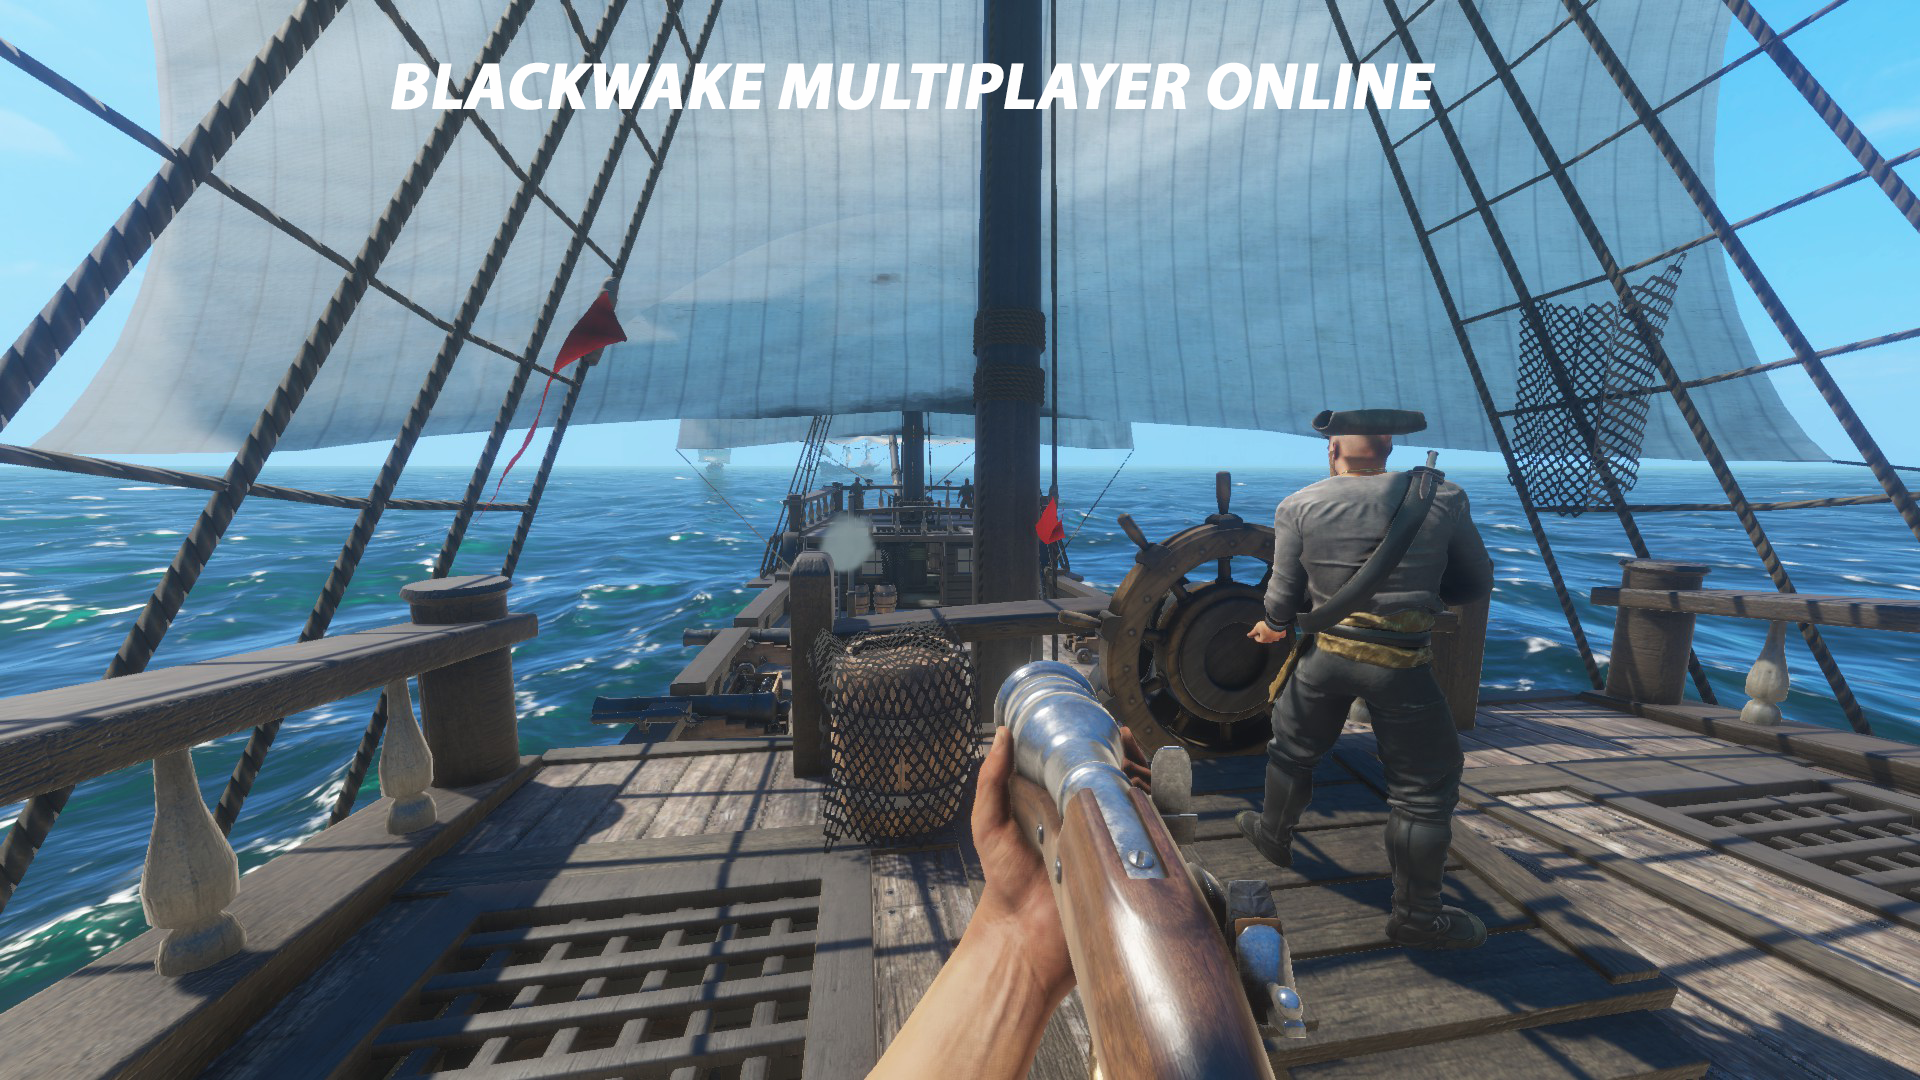 Blackwake Multiplayer Sims 3D APK 1.01 for Android – Download Blackwake Multiplayer  Sims 3D APK Latest Version from APKFab.com